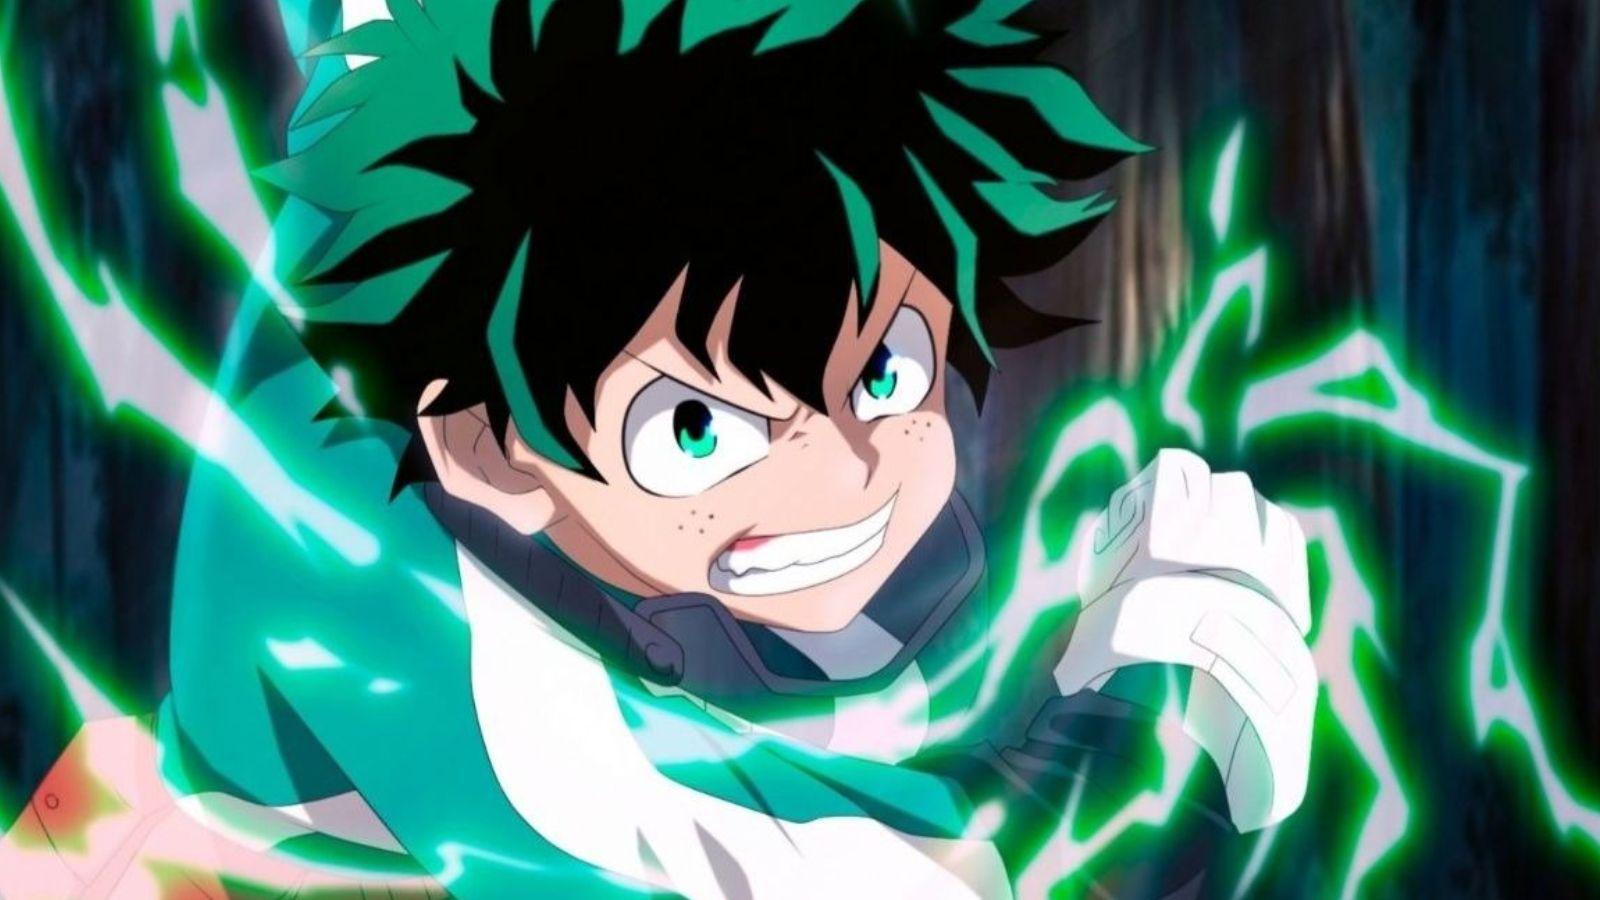 An Updated Review on My Hero Academia Season Five (Spoilers